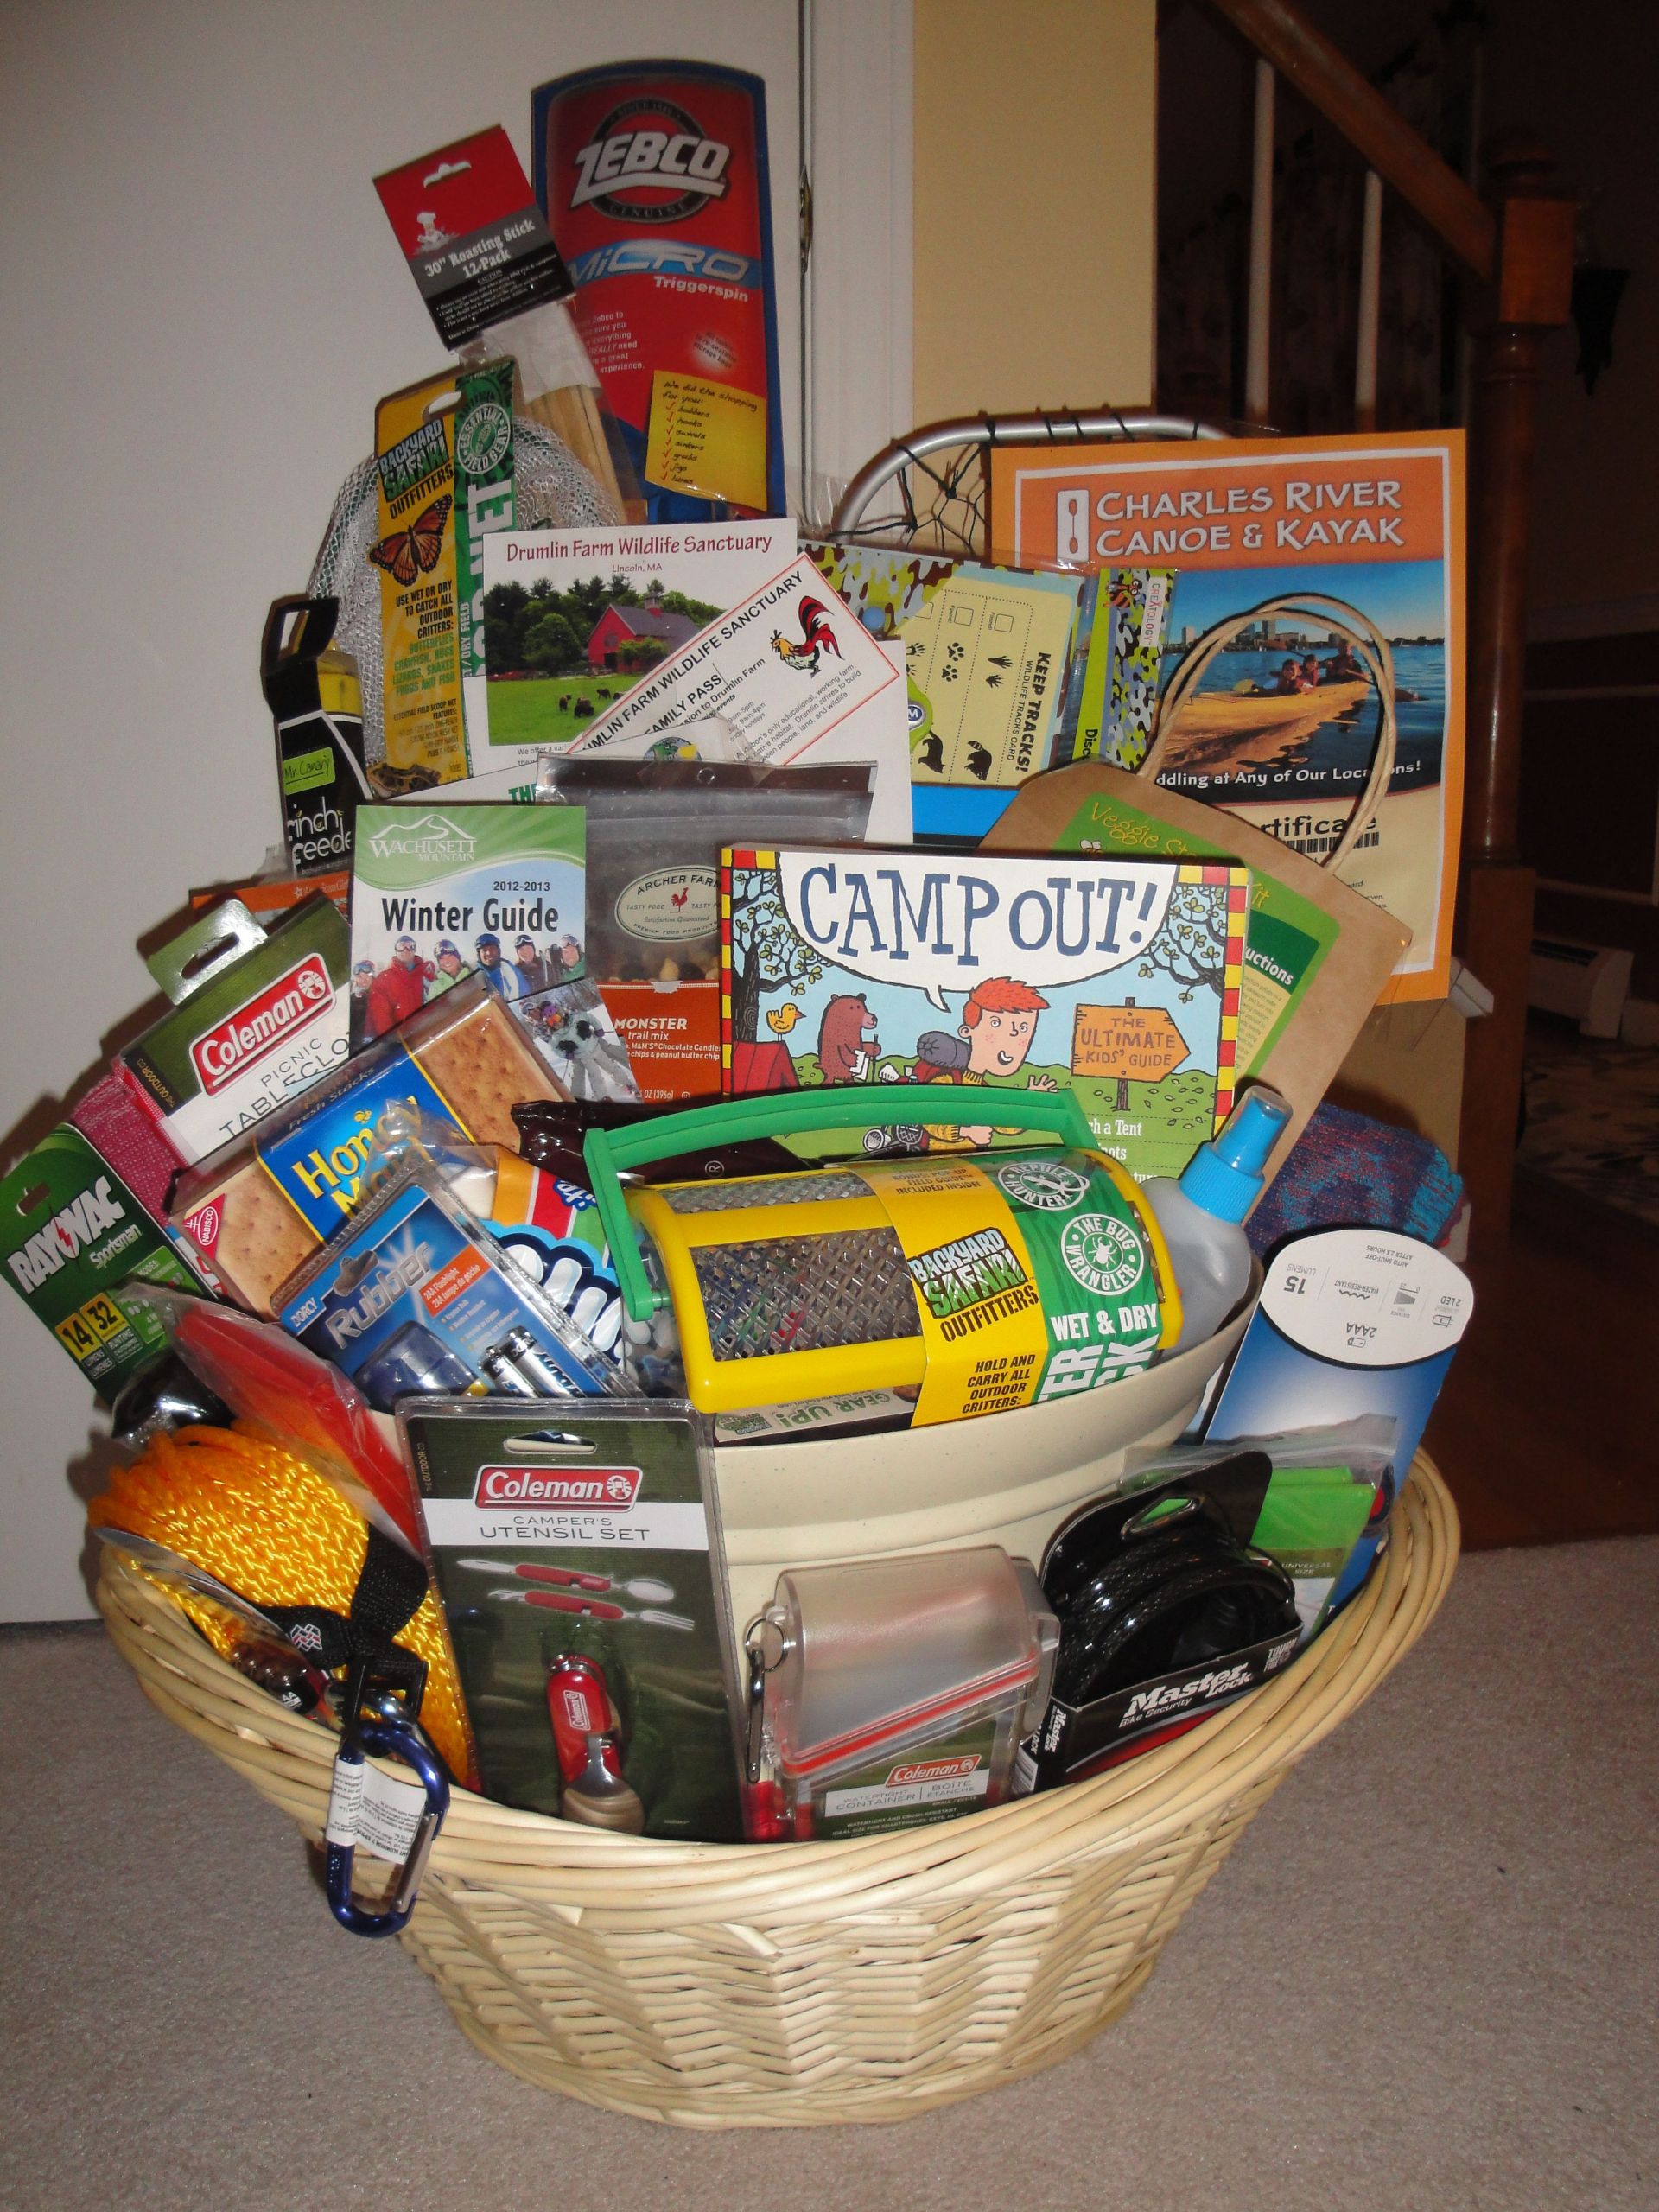 Outdoor Gift Basket Ideas
 The "Great Outdoors" Basket 2013